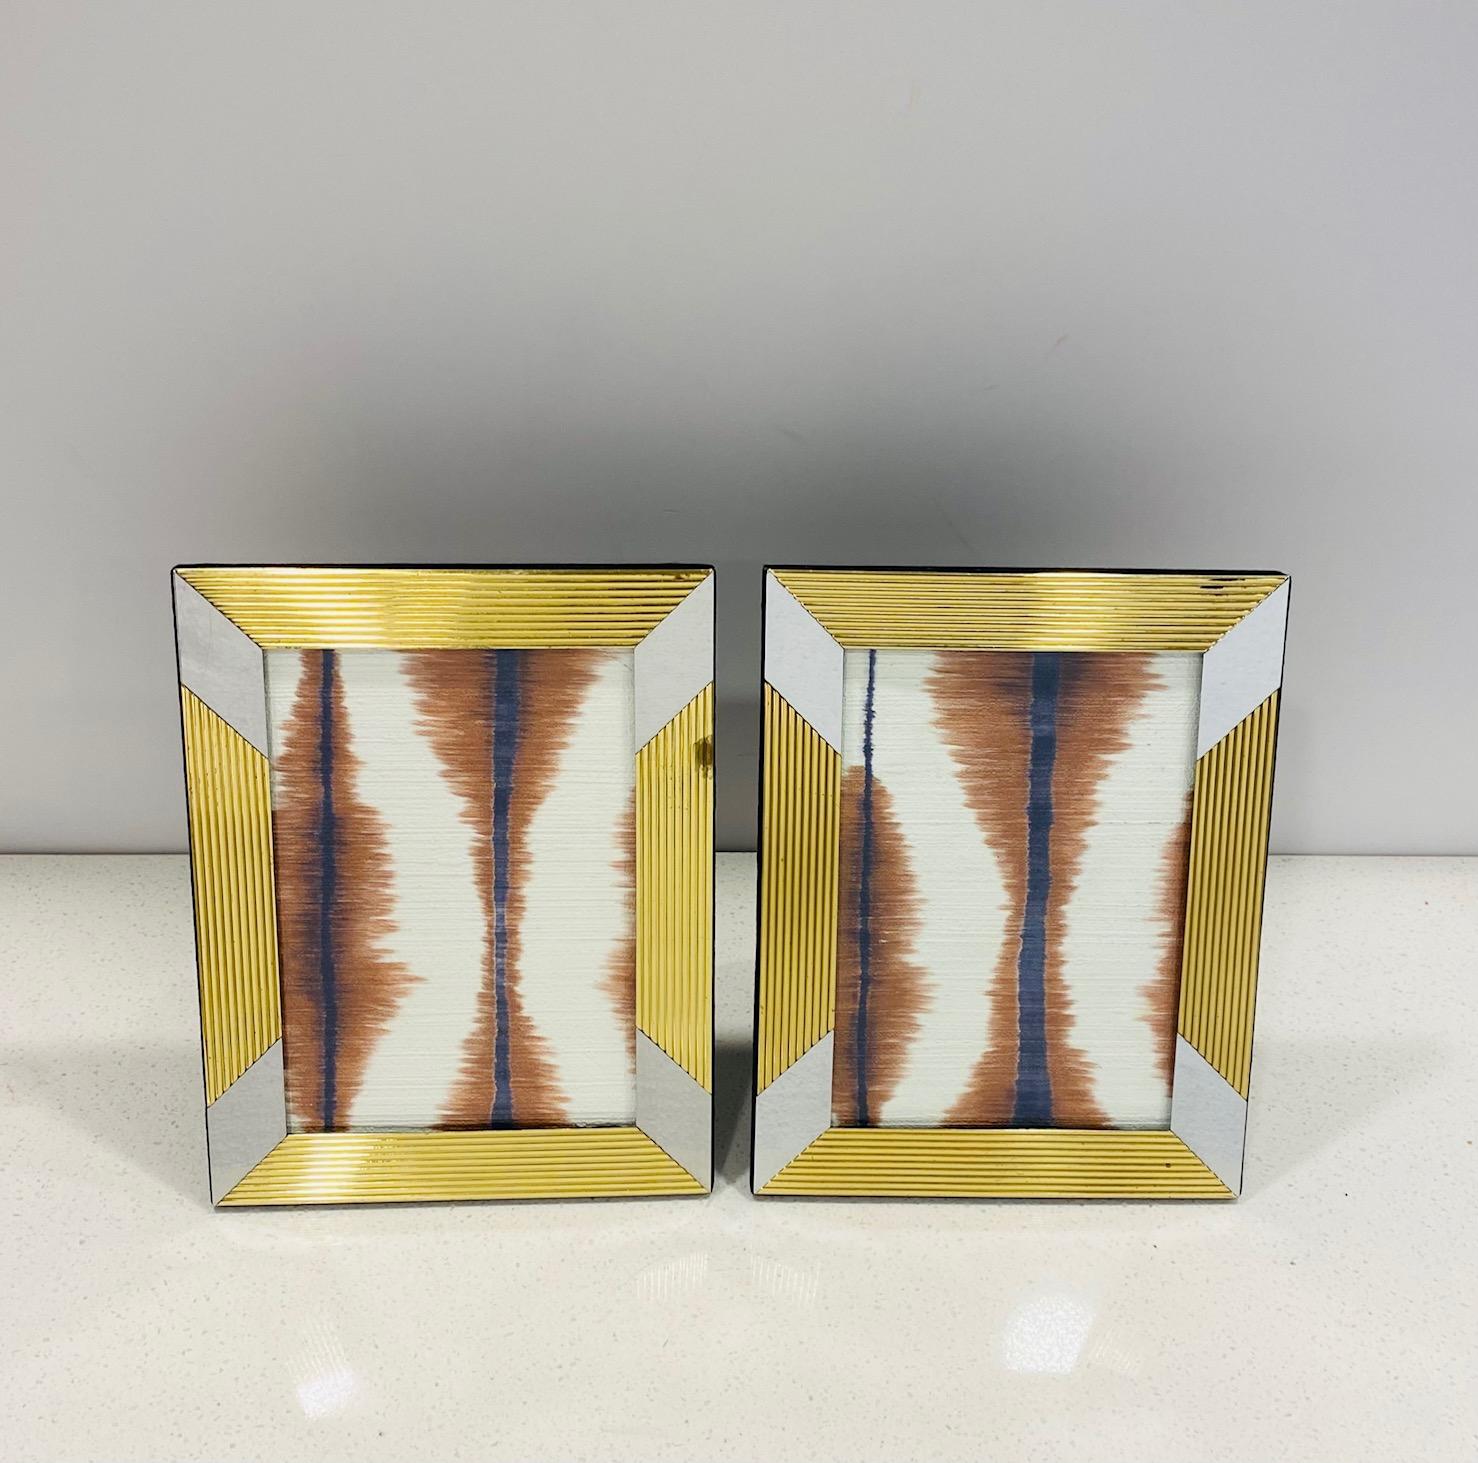 Italian Pair of Geometric Brass and Chrome Picture Frames, Italy, C. 1970s For Sale